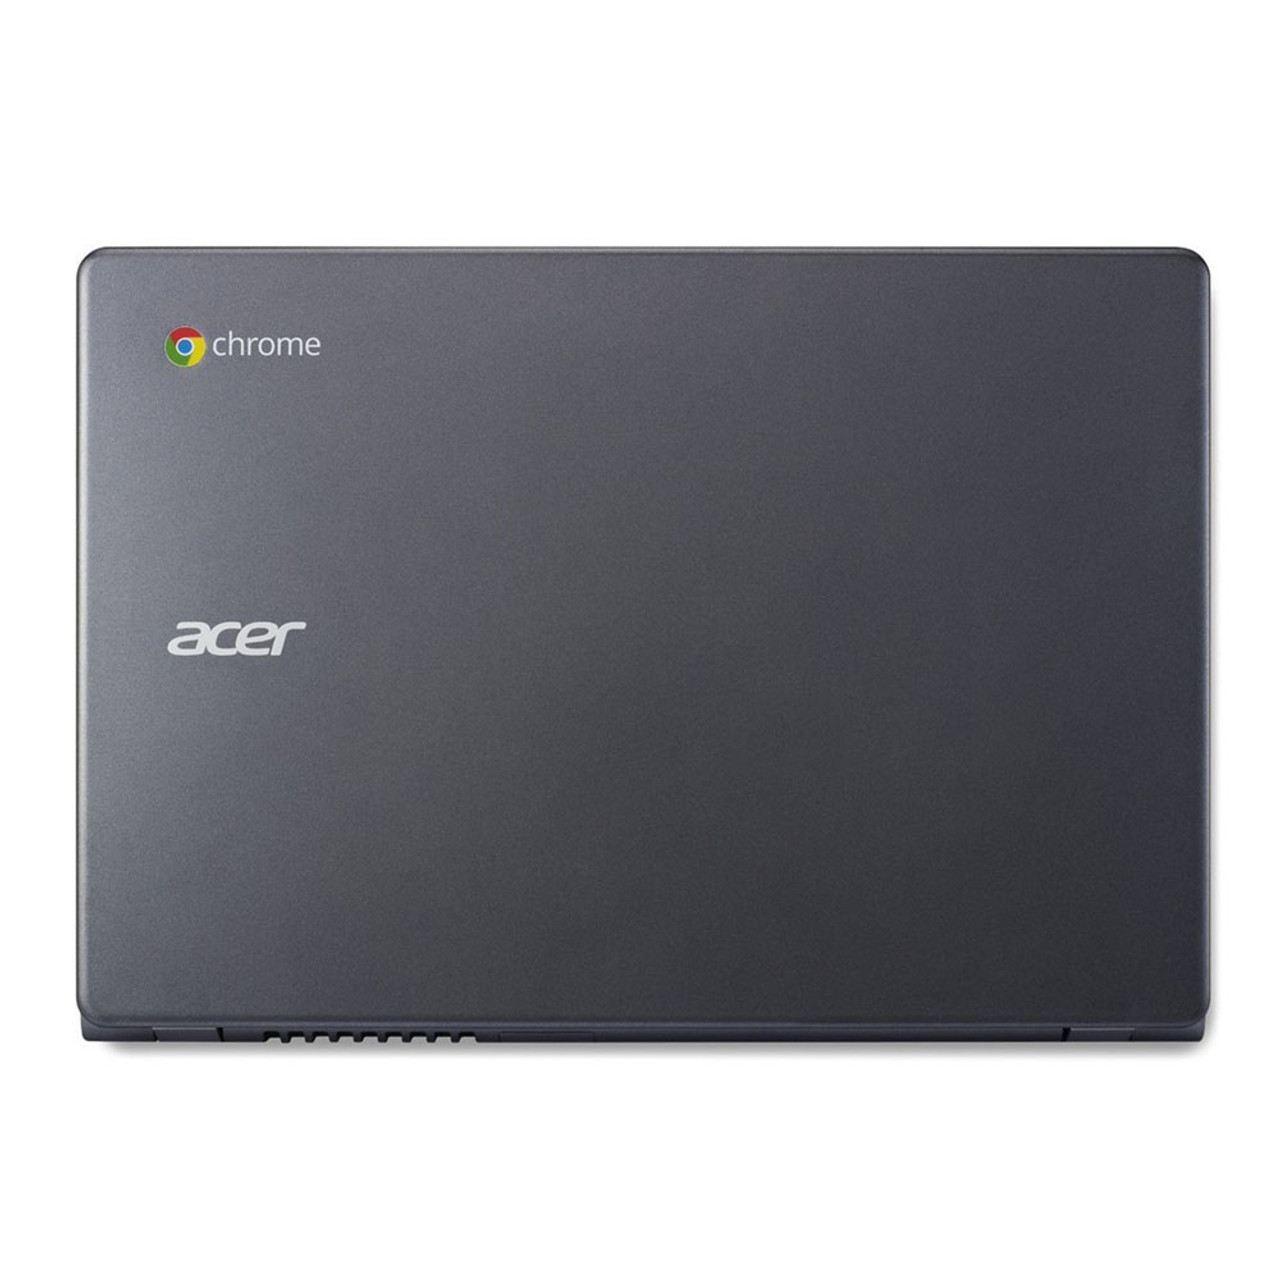 Acer Chromebook 11.6" HD Display, Intel Processor, 16GB SSD Drive product image